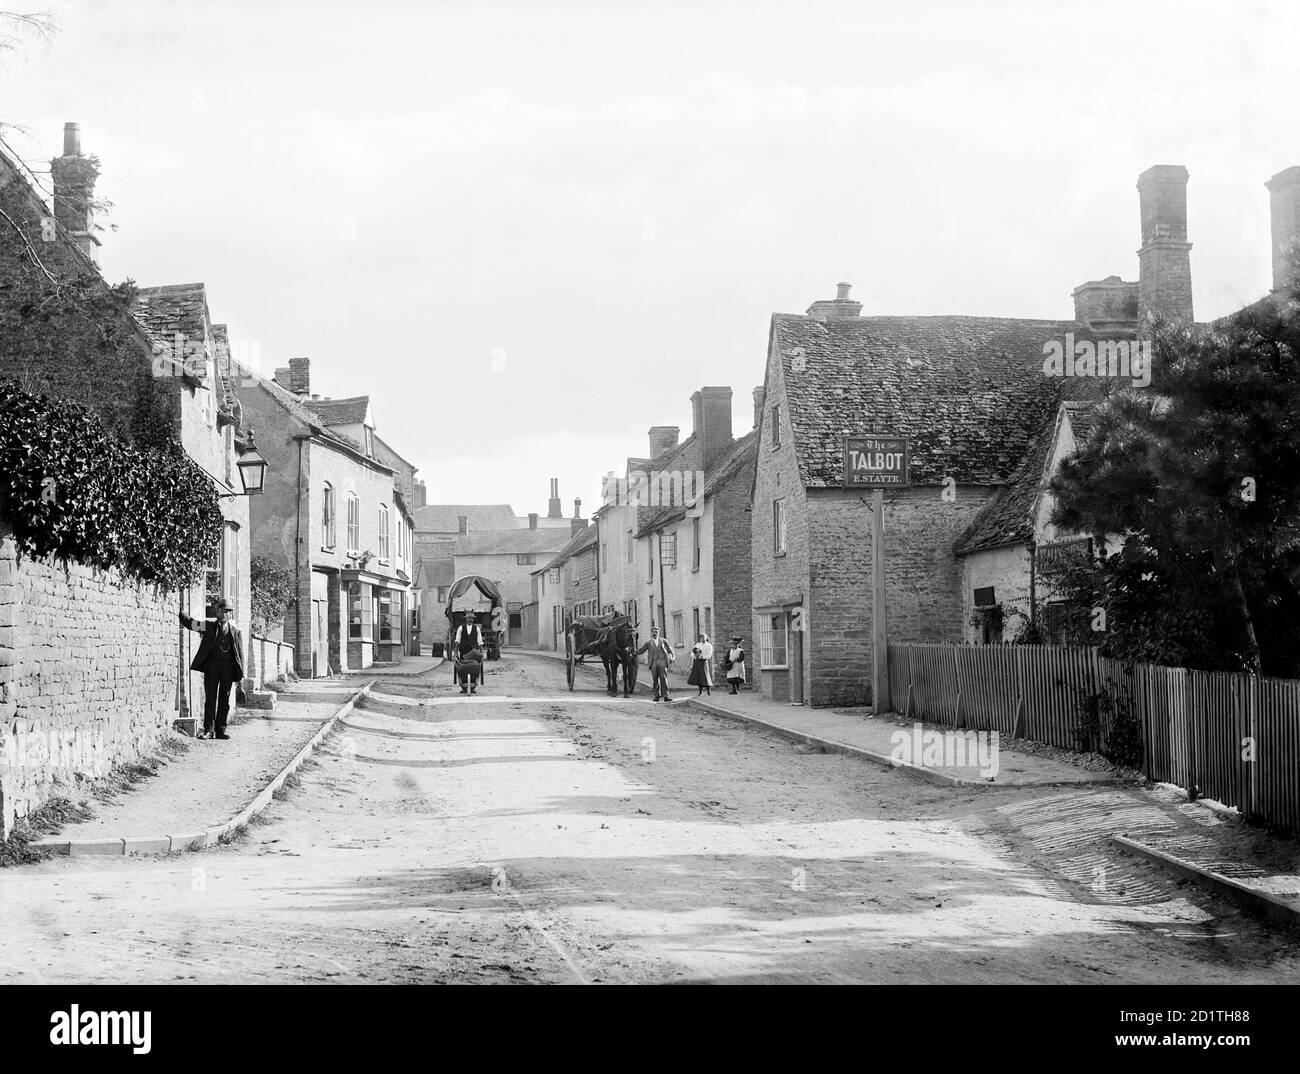 CHARLBURY, Oxfordshire. A street scene showing Thames Street with several local inhabitants, one with a wheelbarrow, standing near the Talbot public house. Photographed by Henry Taunt (active 1860 - 1922). Stock Photo